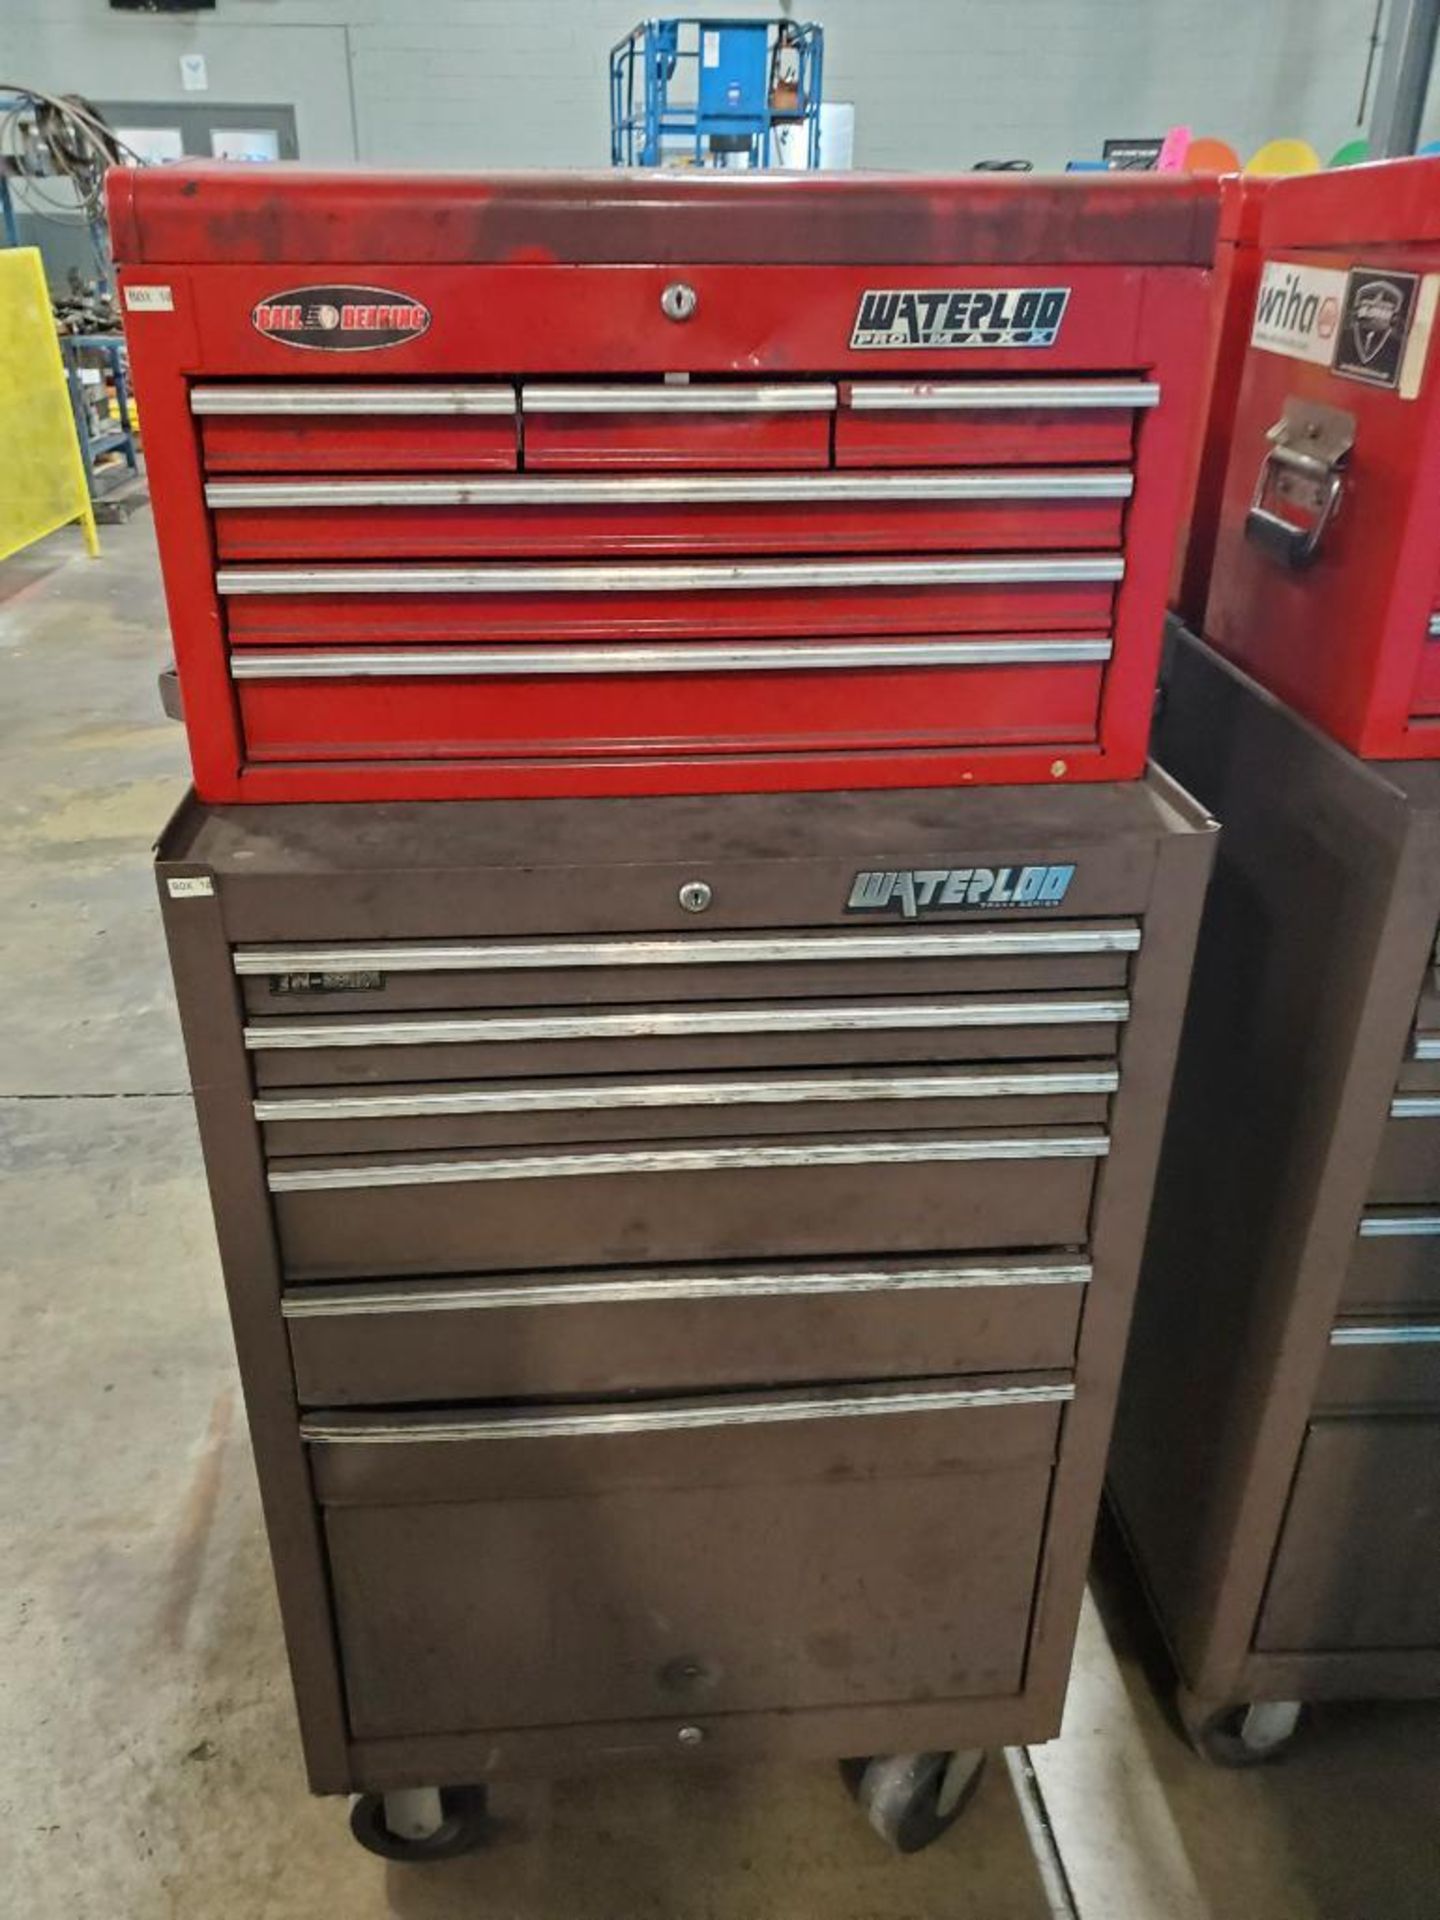 Qty 4 - Assorted tool boxes. Waterloo. 26x12x16, 27x18x41 WxDxH. - Image 5 of 7